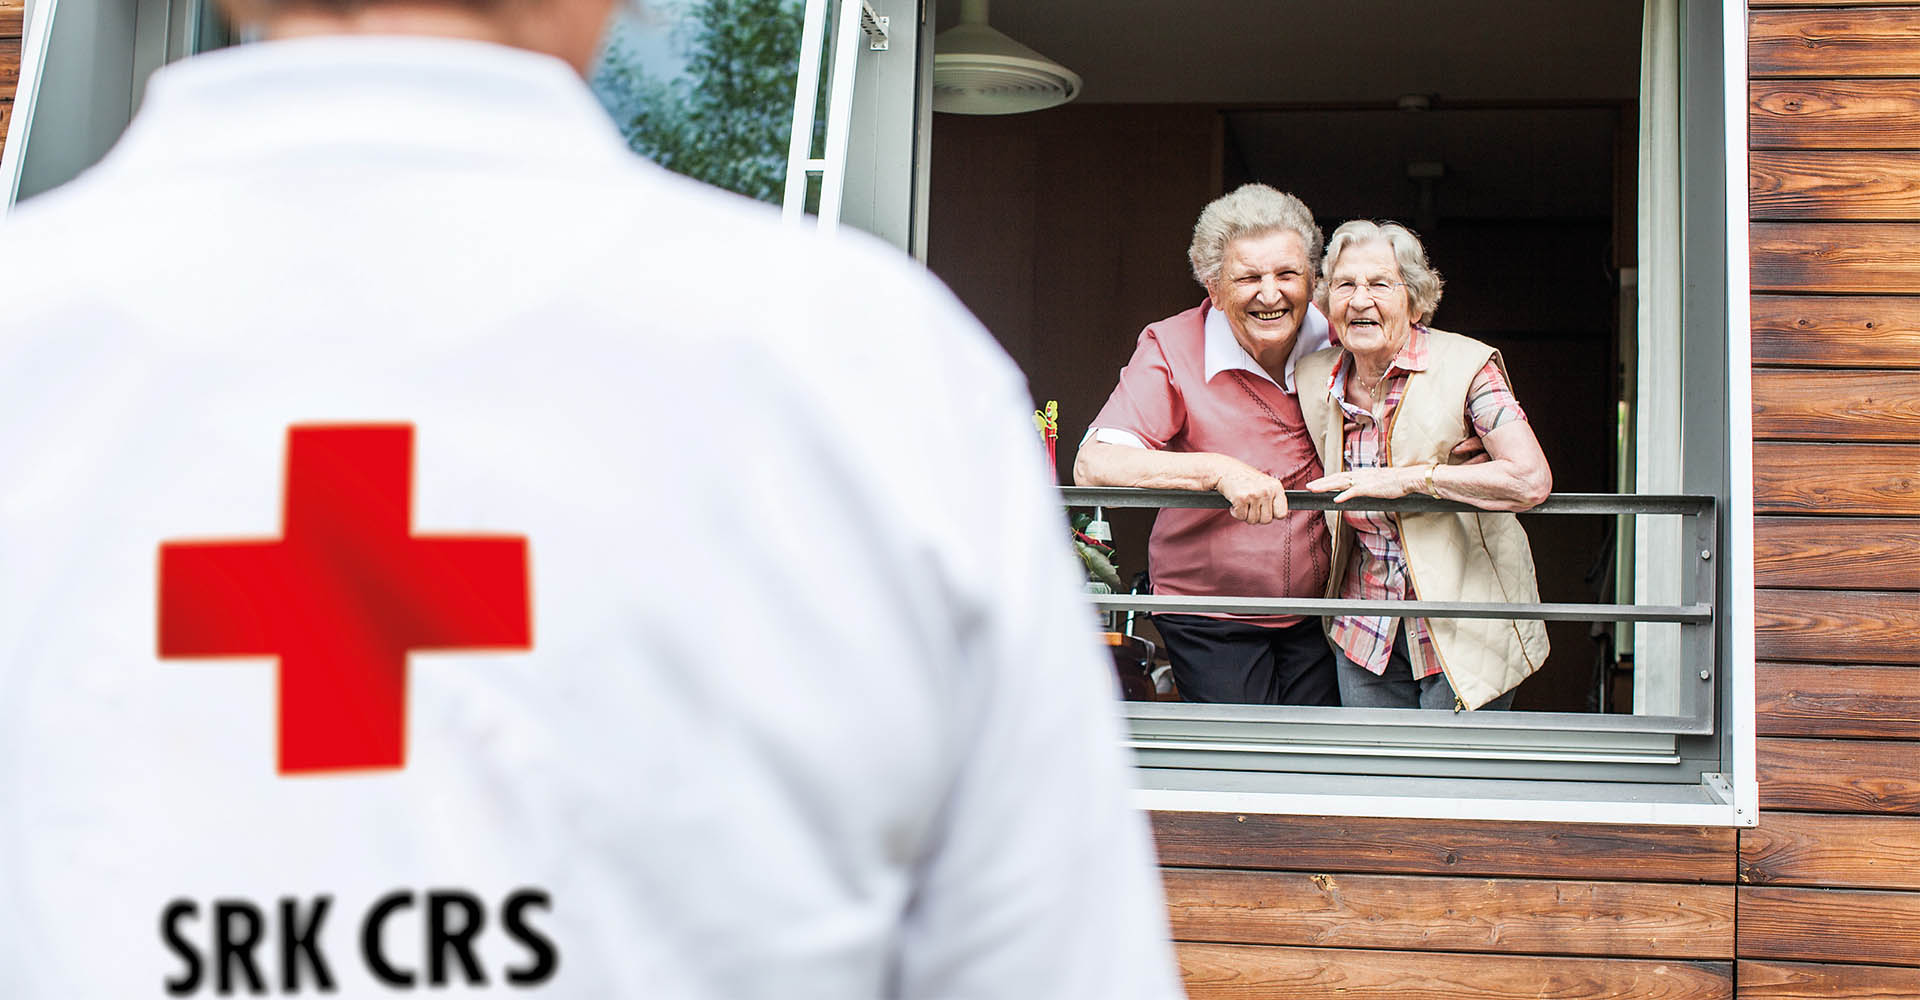 An employee of the Red Cross is greeting two elderly ladies (Photo)